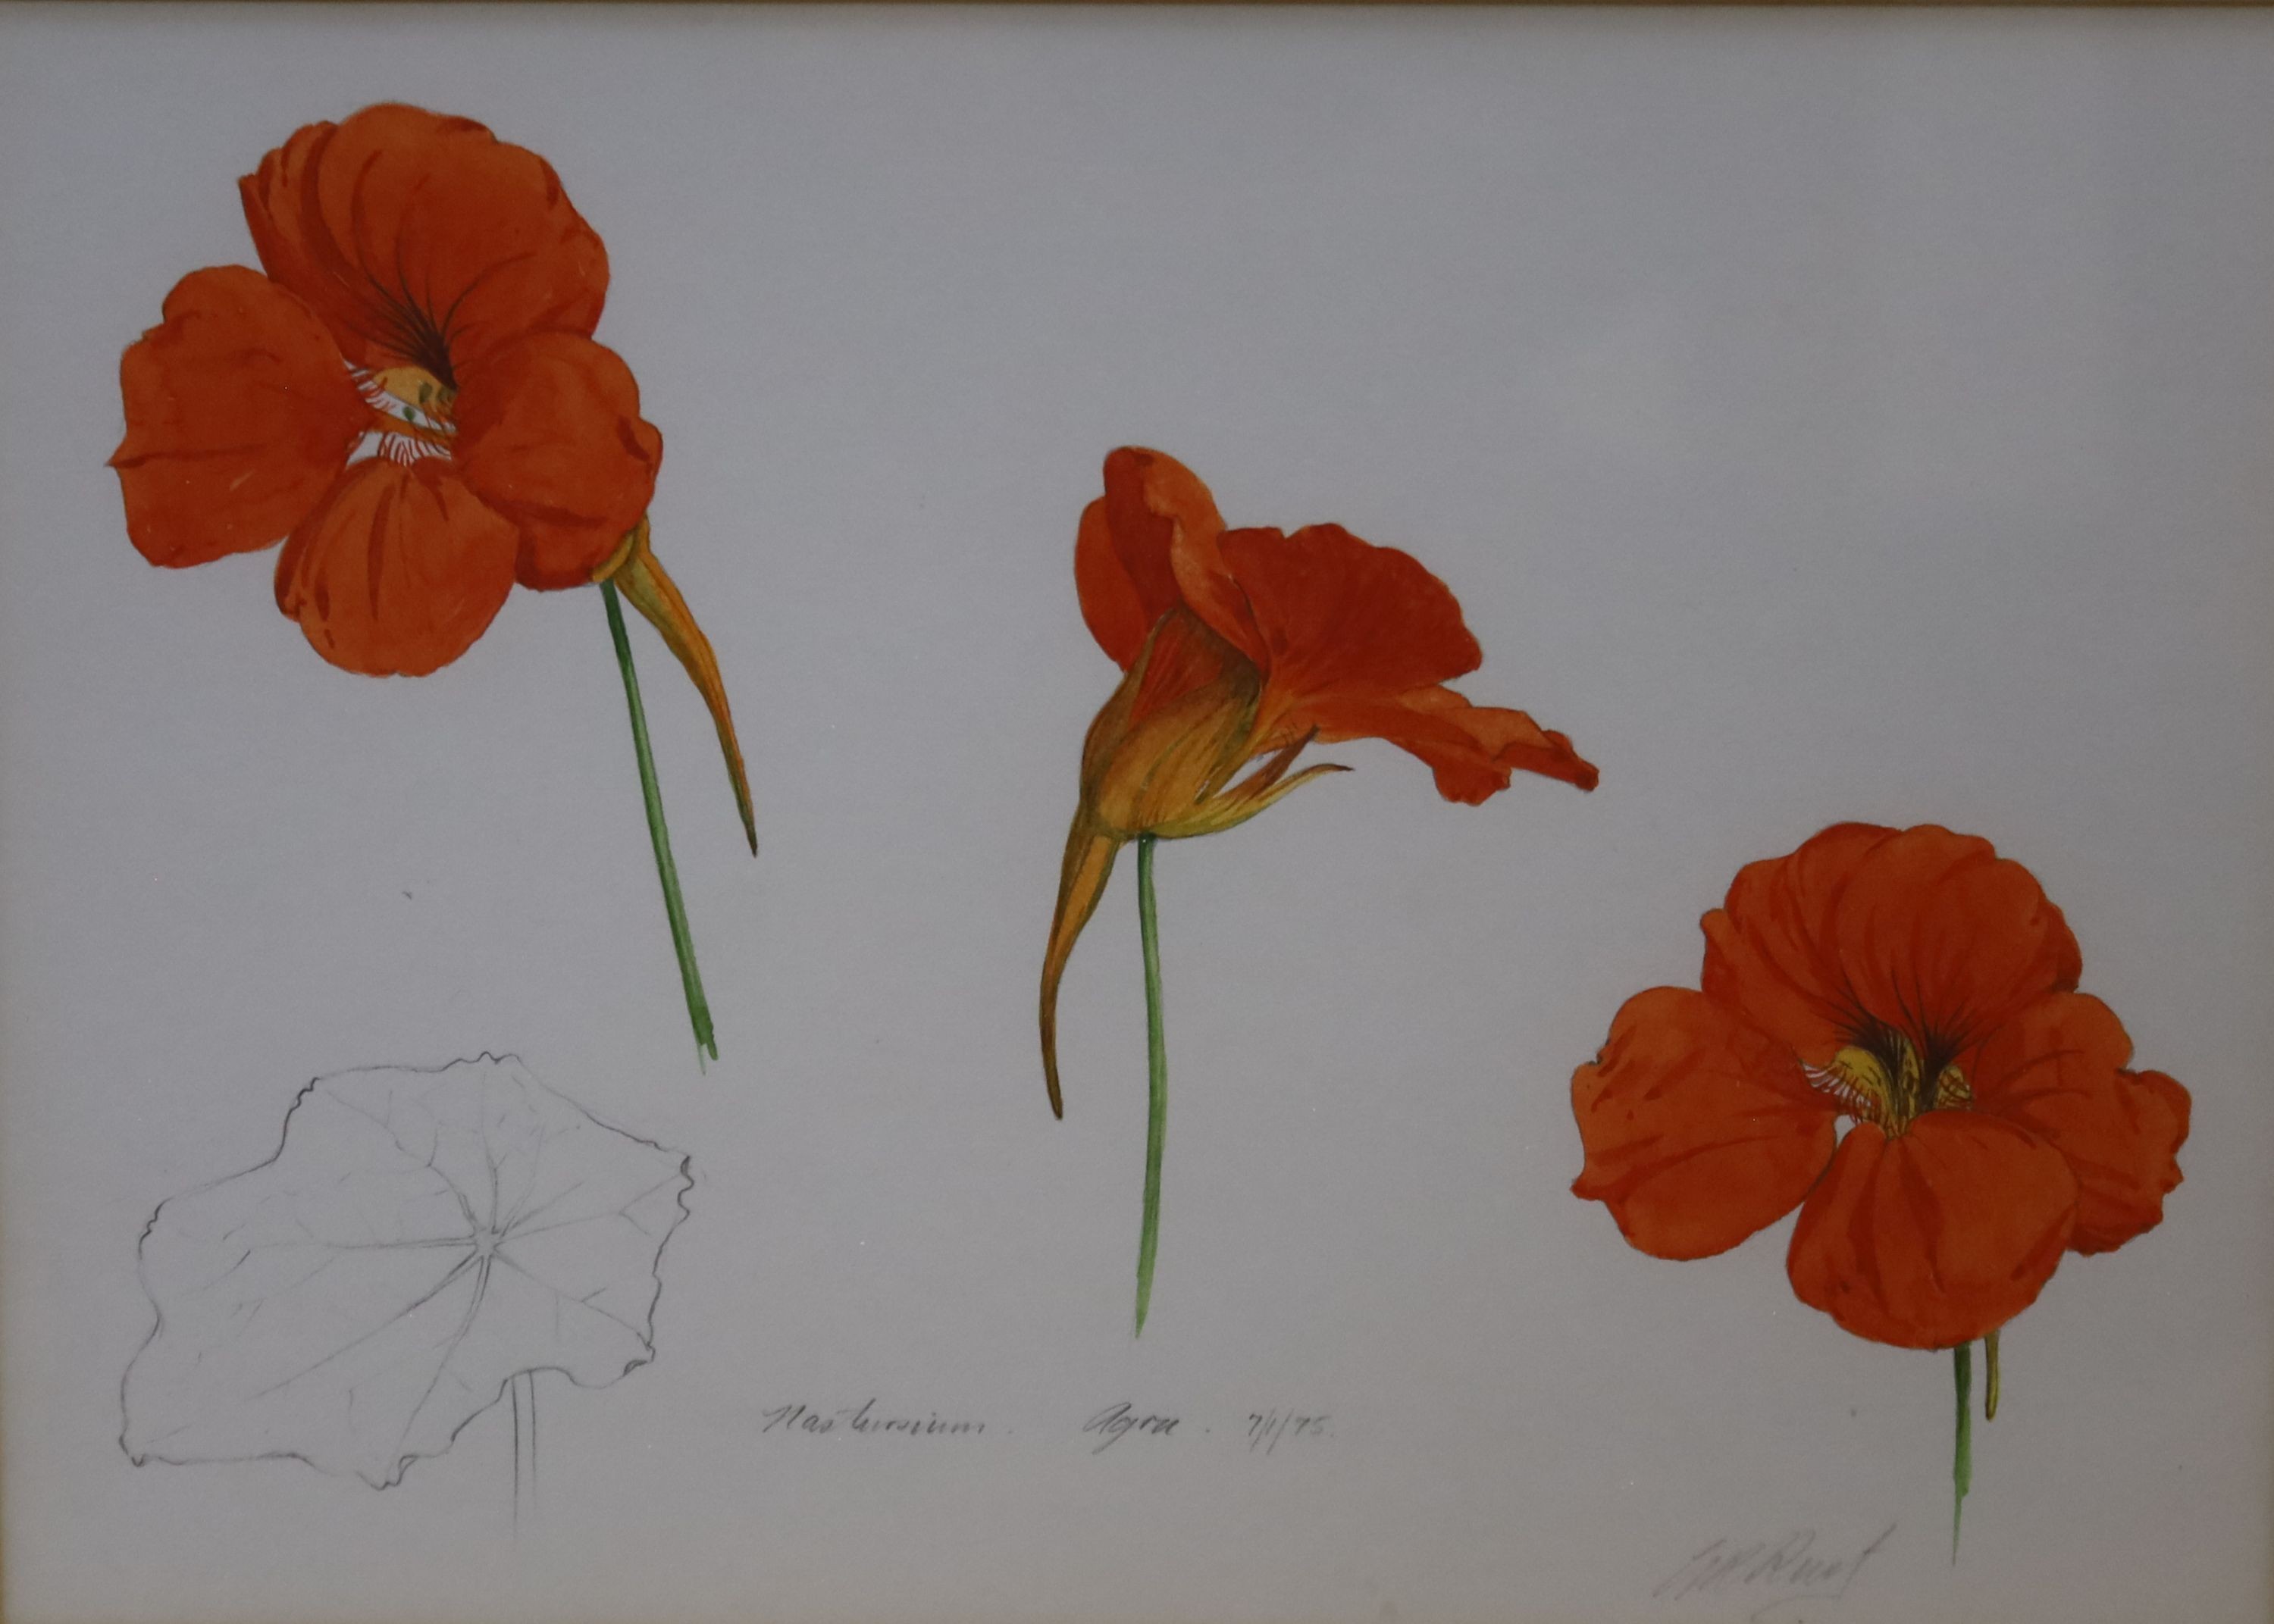 Graham Rust (1942-), pencil and watercolour, Nasturtium, Agra, 7/1/75, signed with Spink label verso, 14 x 20cm